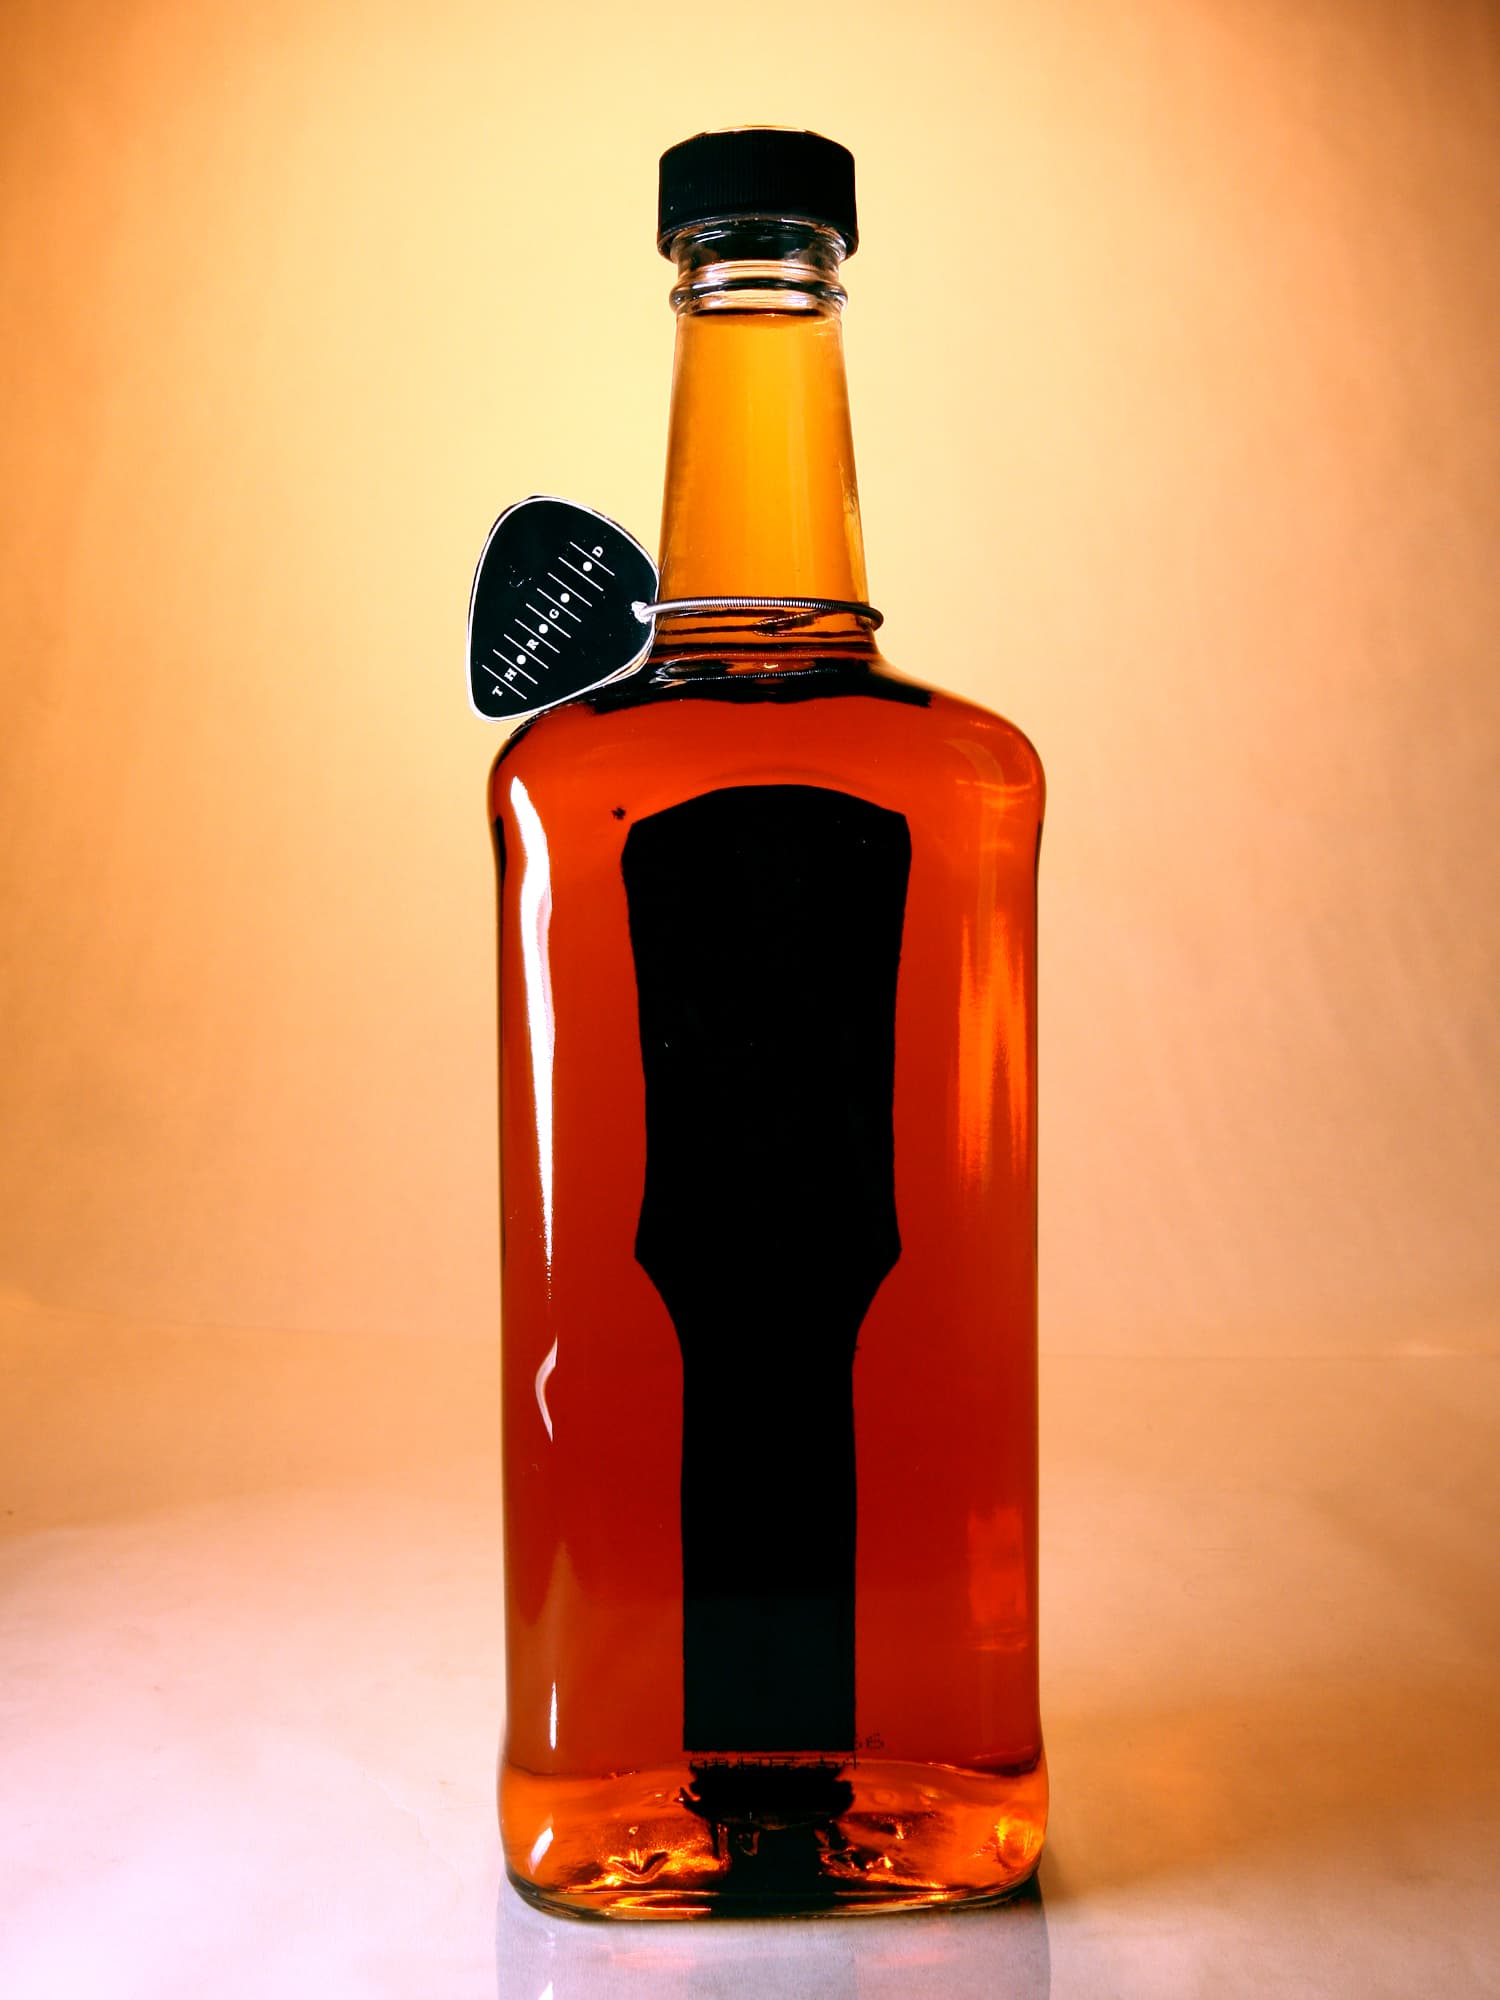 A photo of a bottle of whiskey